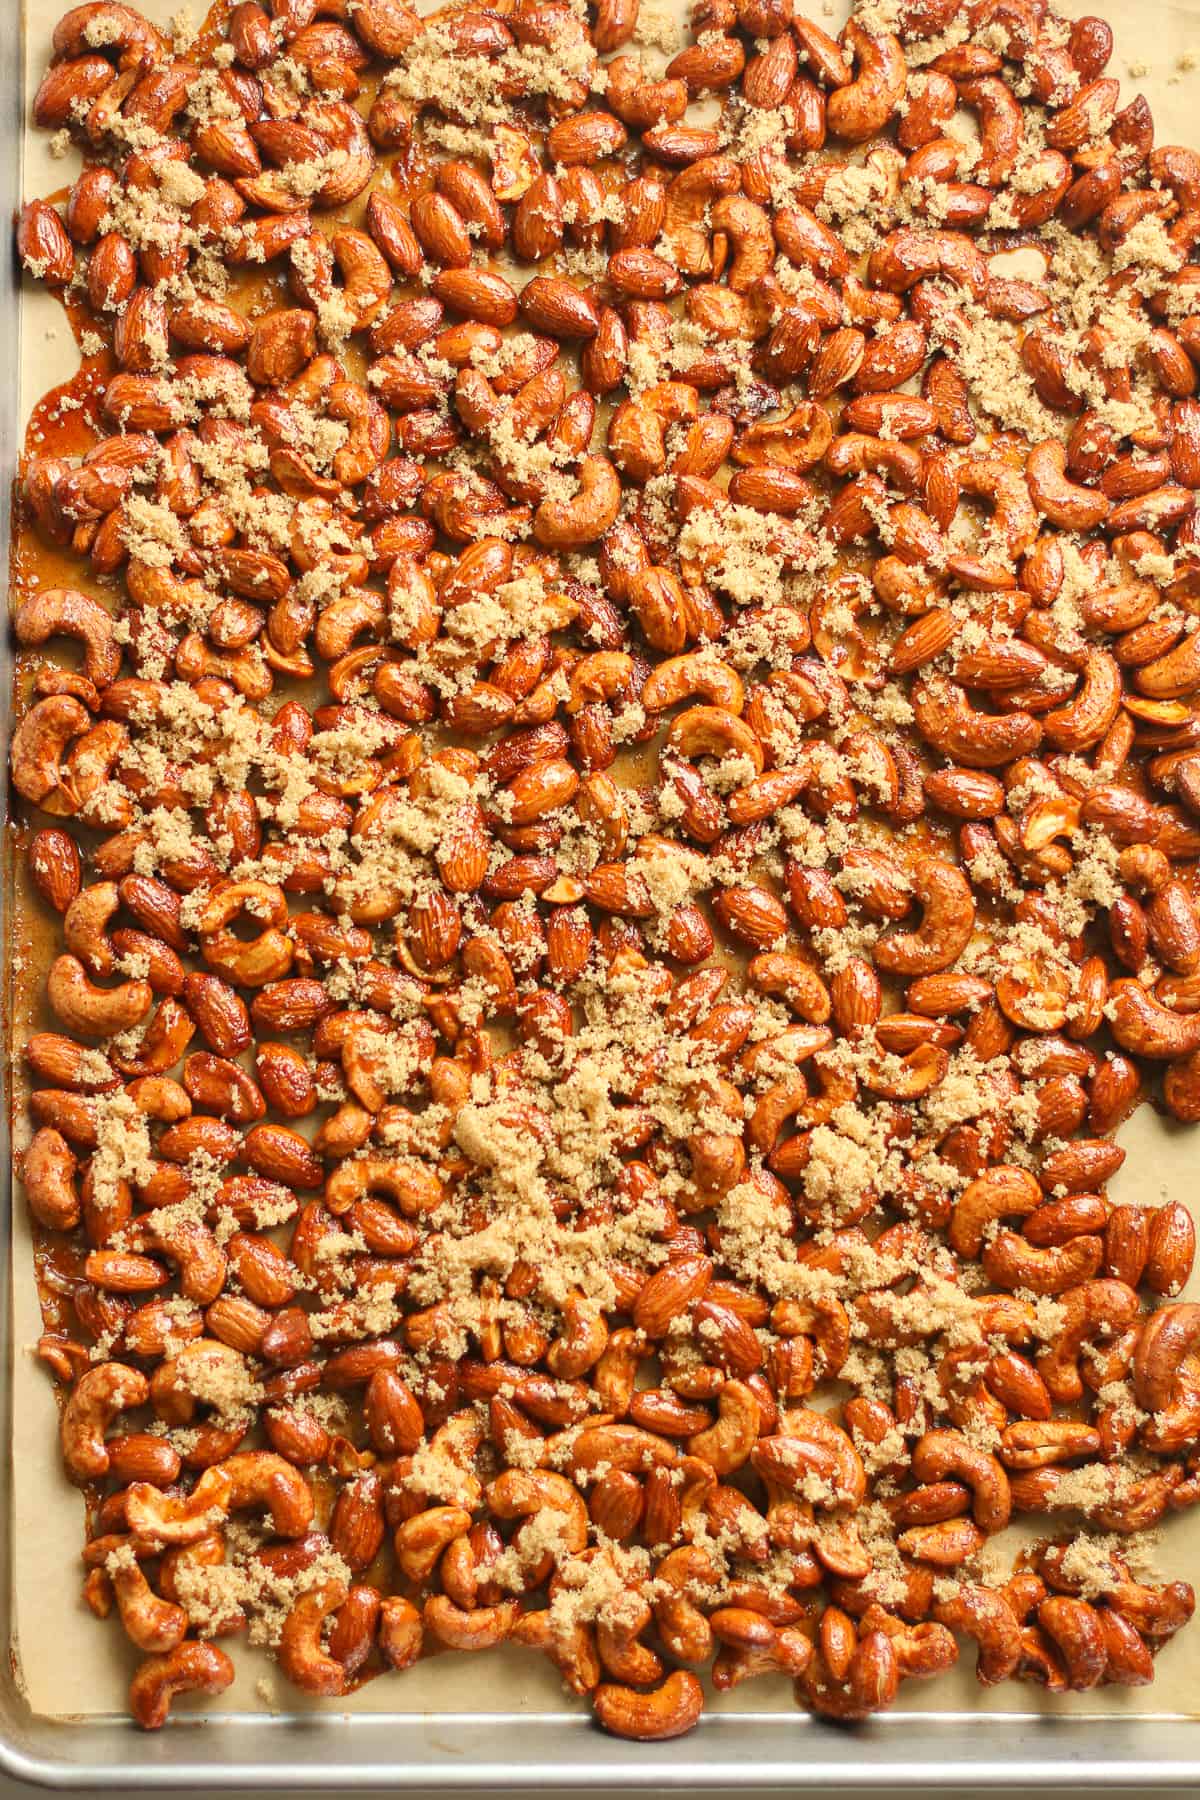 A sheet pan of the just roasted nuts with brown sugar sprinkled on top.